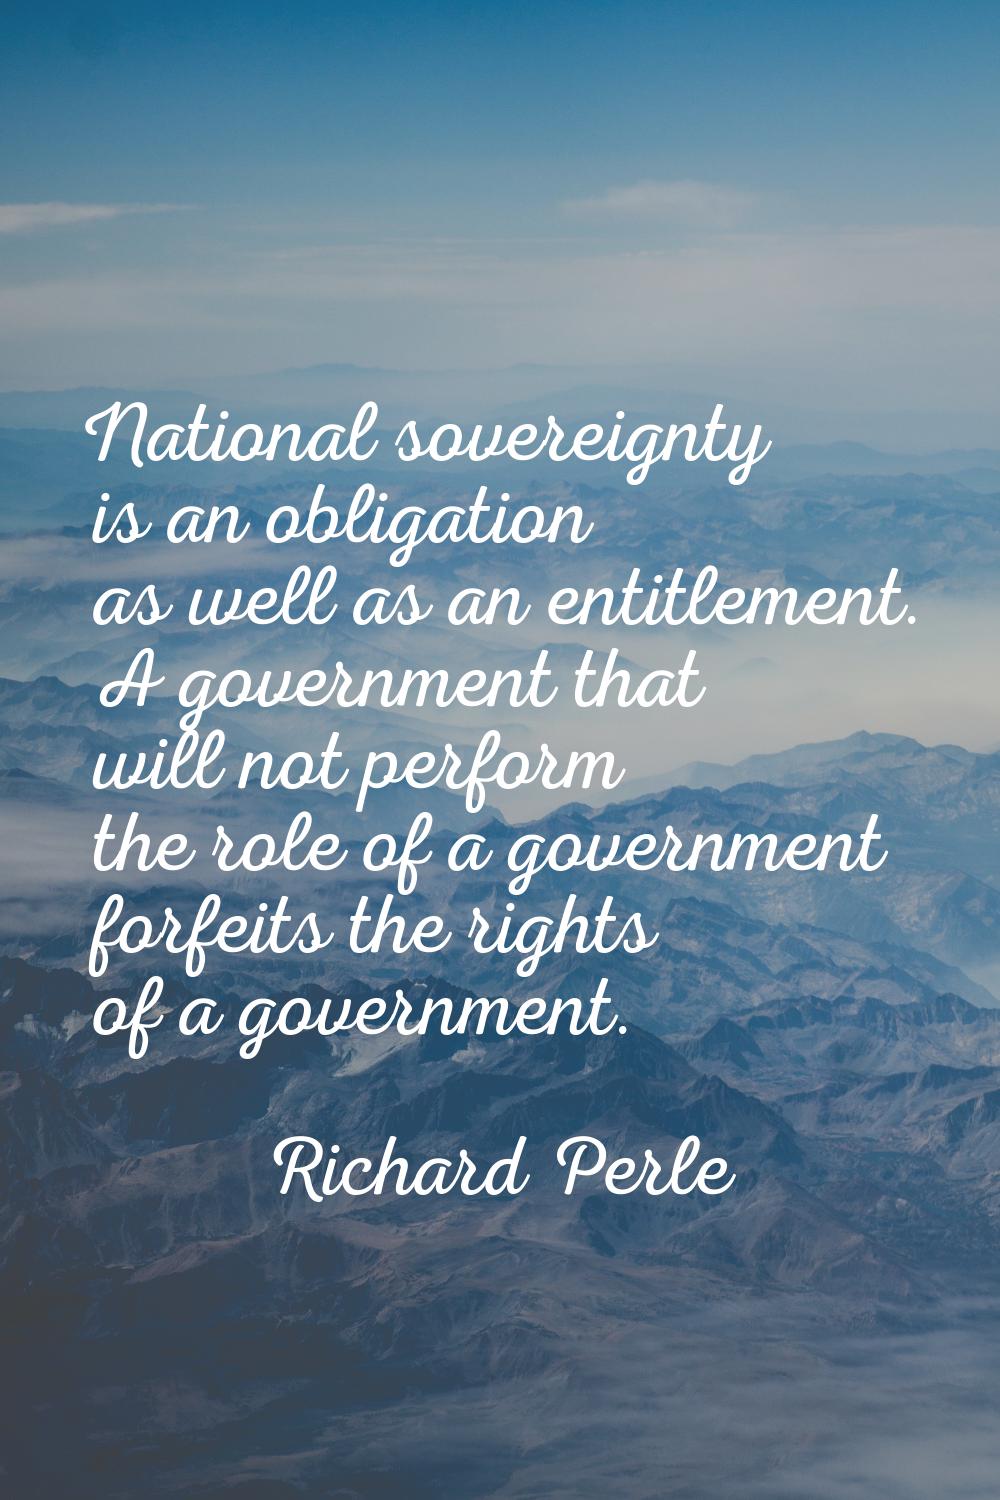 National sovereignty is an obligation as well as an entitlement. A government that will not perform